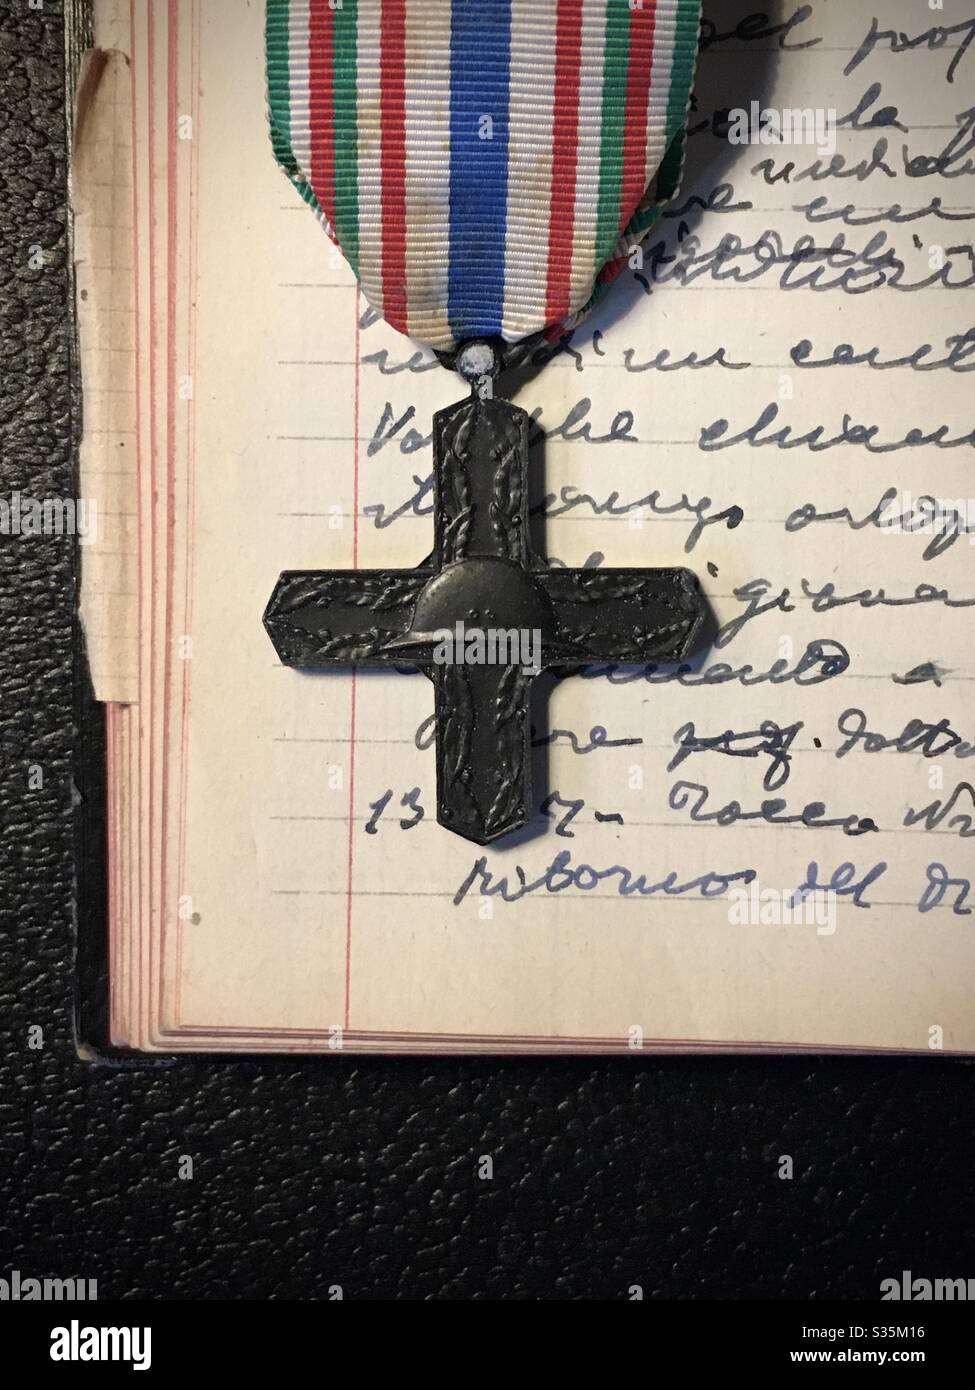 Old Italian commemorative war honor medal on a page of notebook hand written Stock Photo